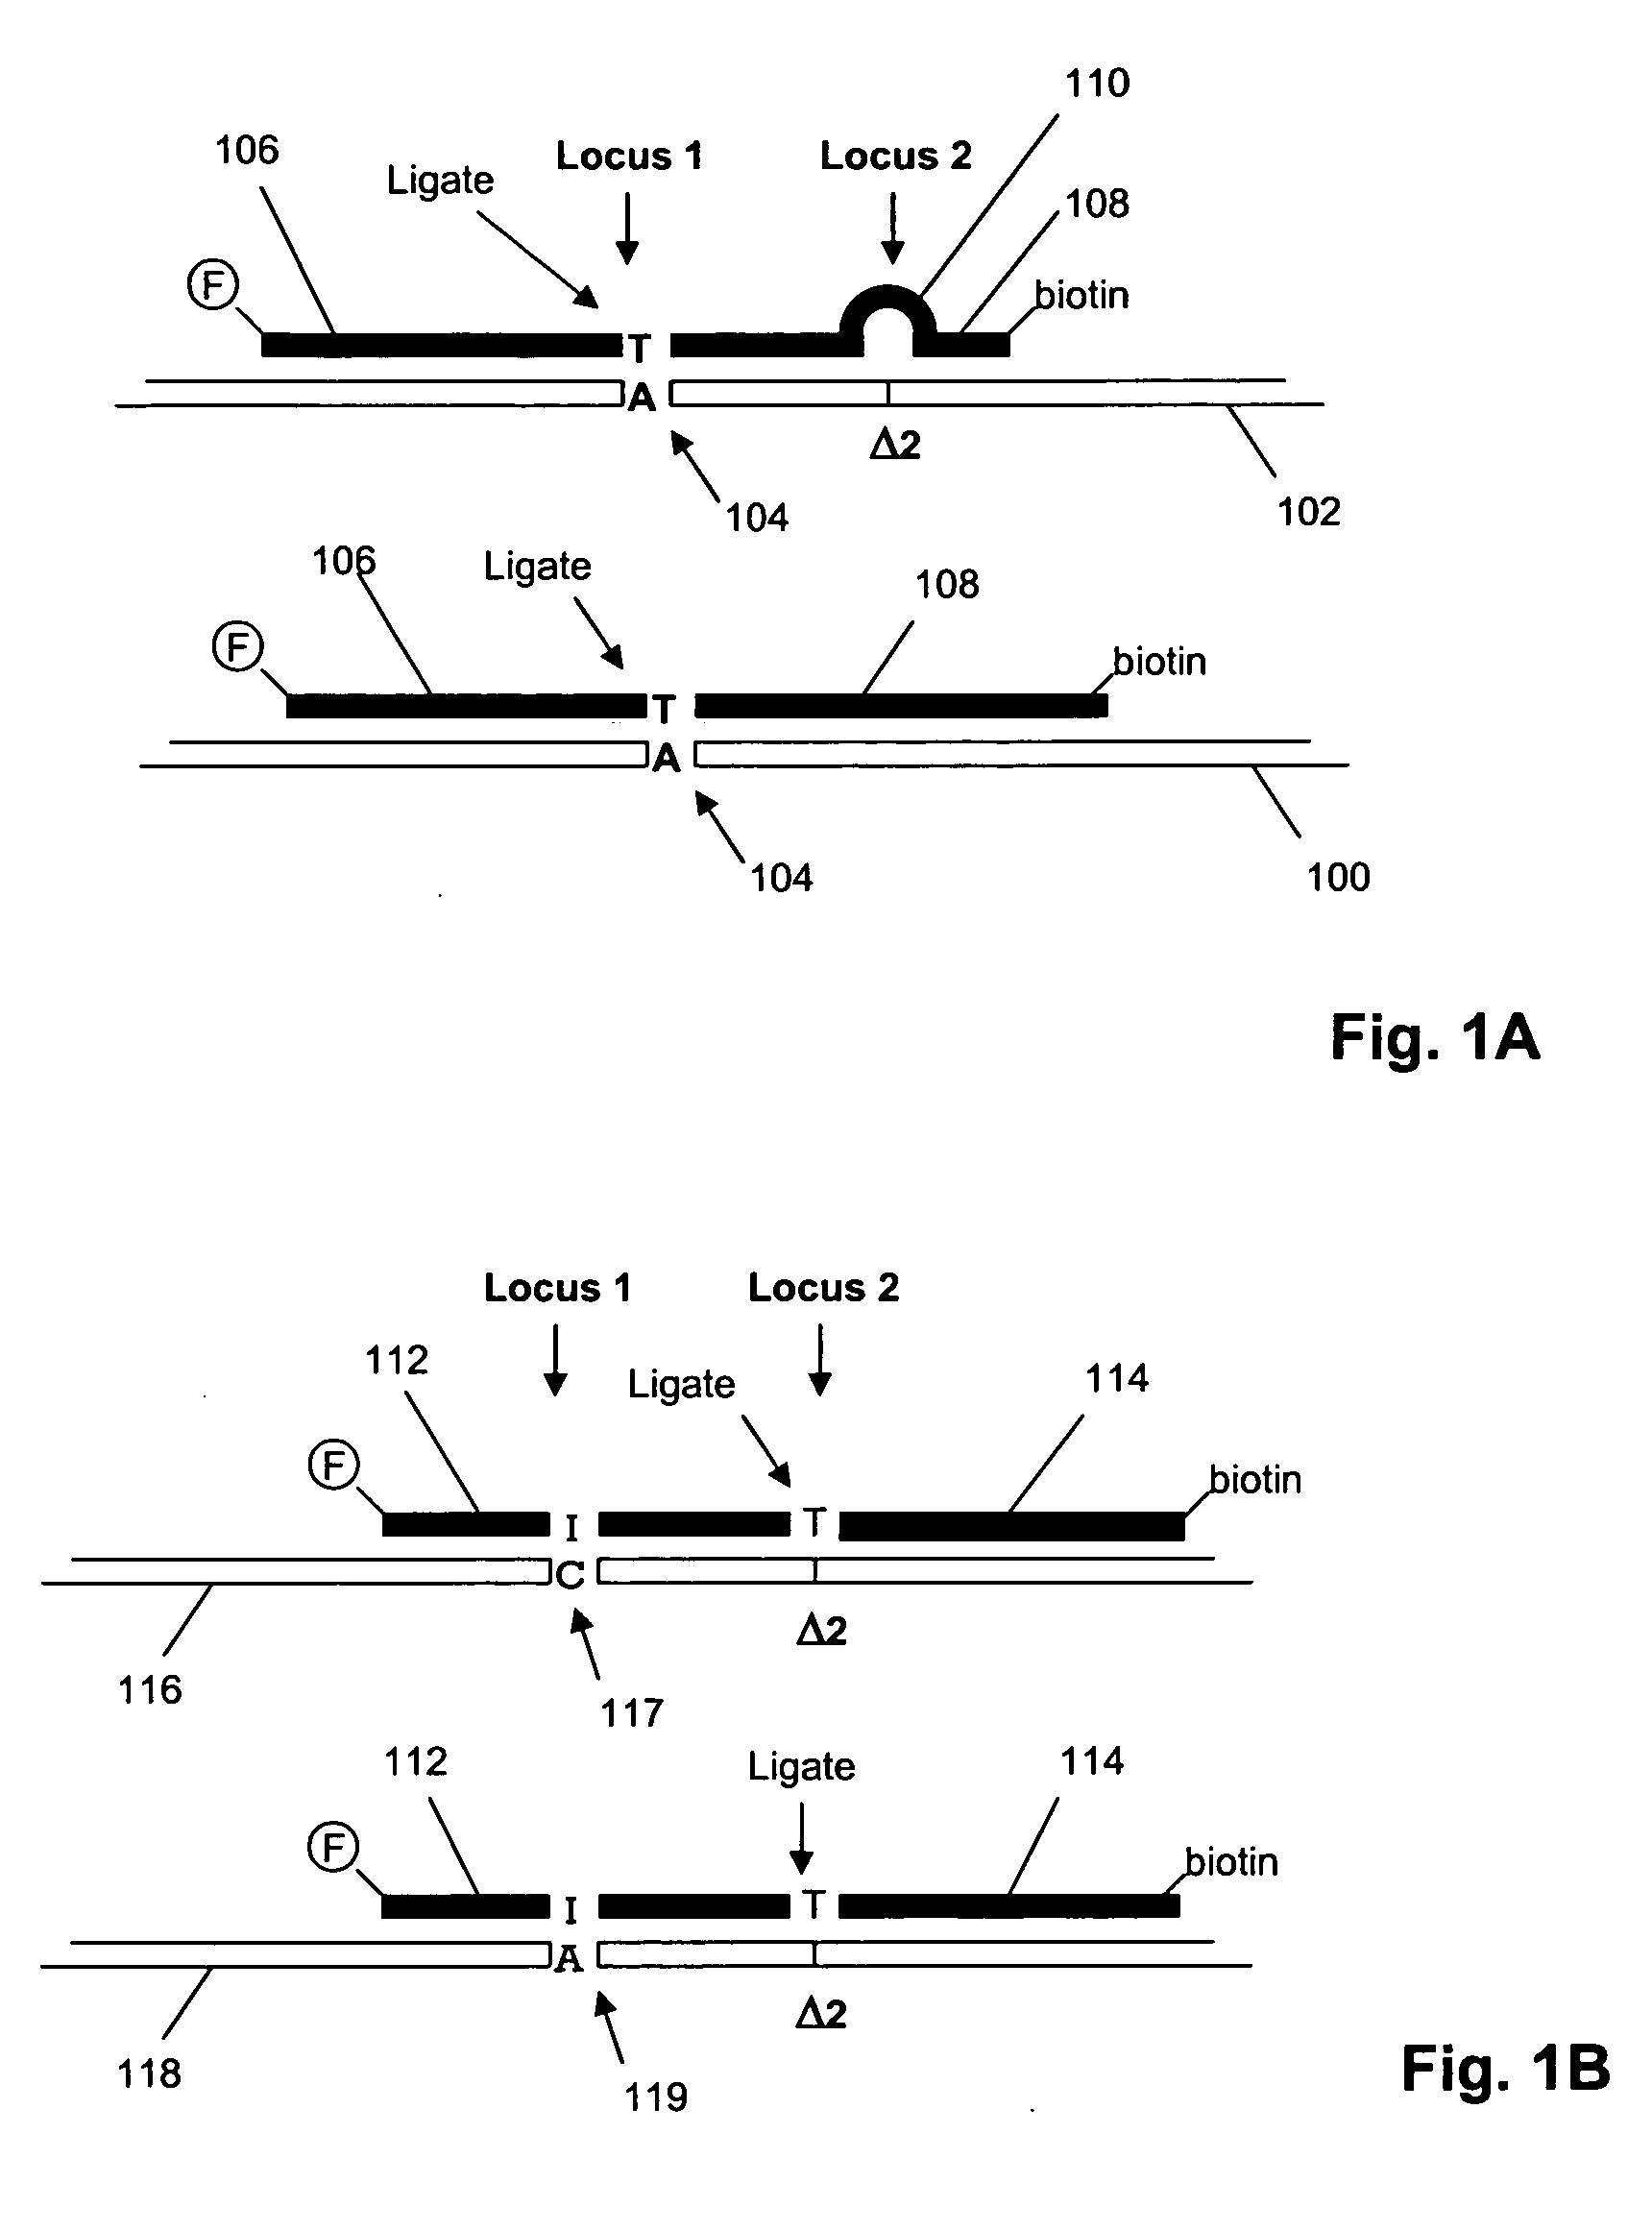 Method and kits for multiplex hybridization assays